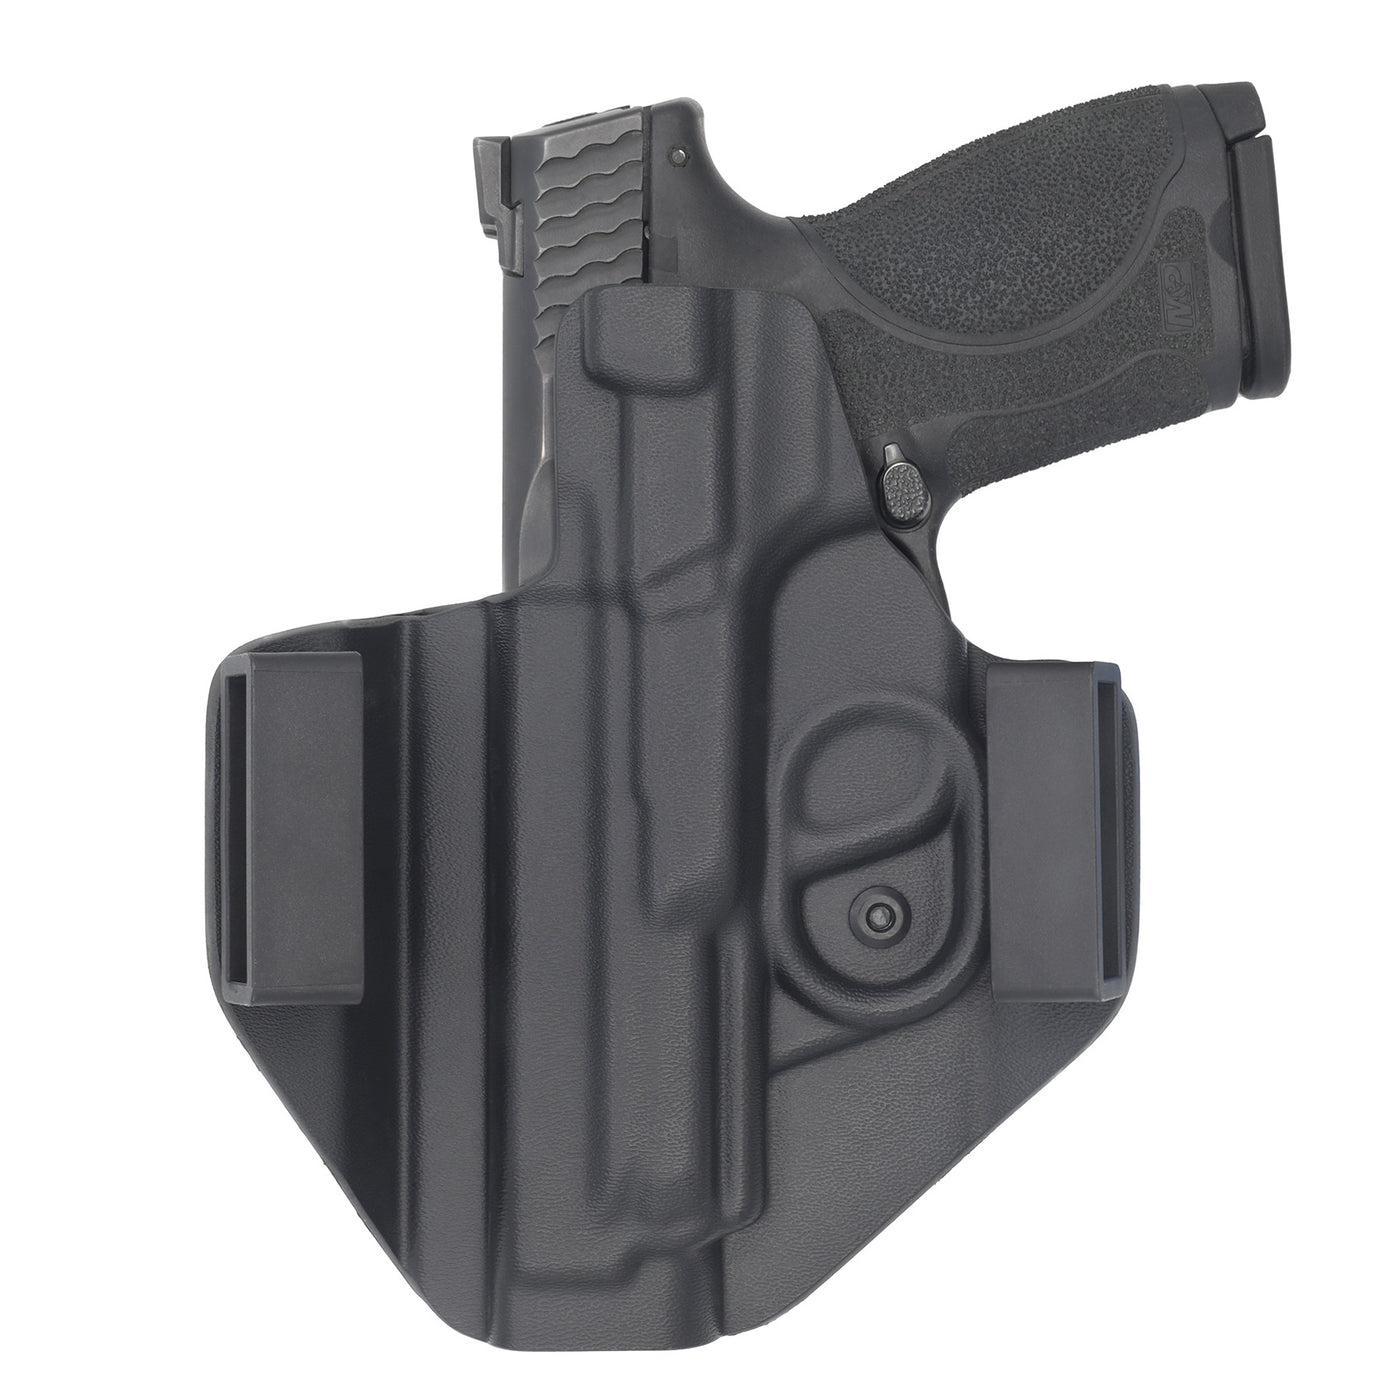 C&G Holsters custom Covert OWB kydex holster for Smith & Wesson M&P 2.0 9/40 4.25" in holstered position rear view